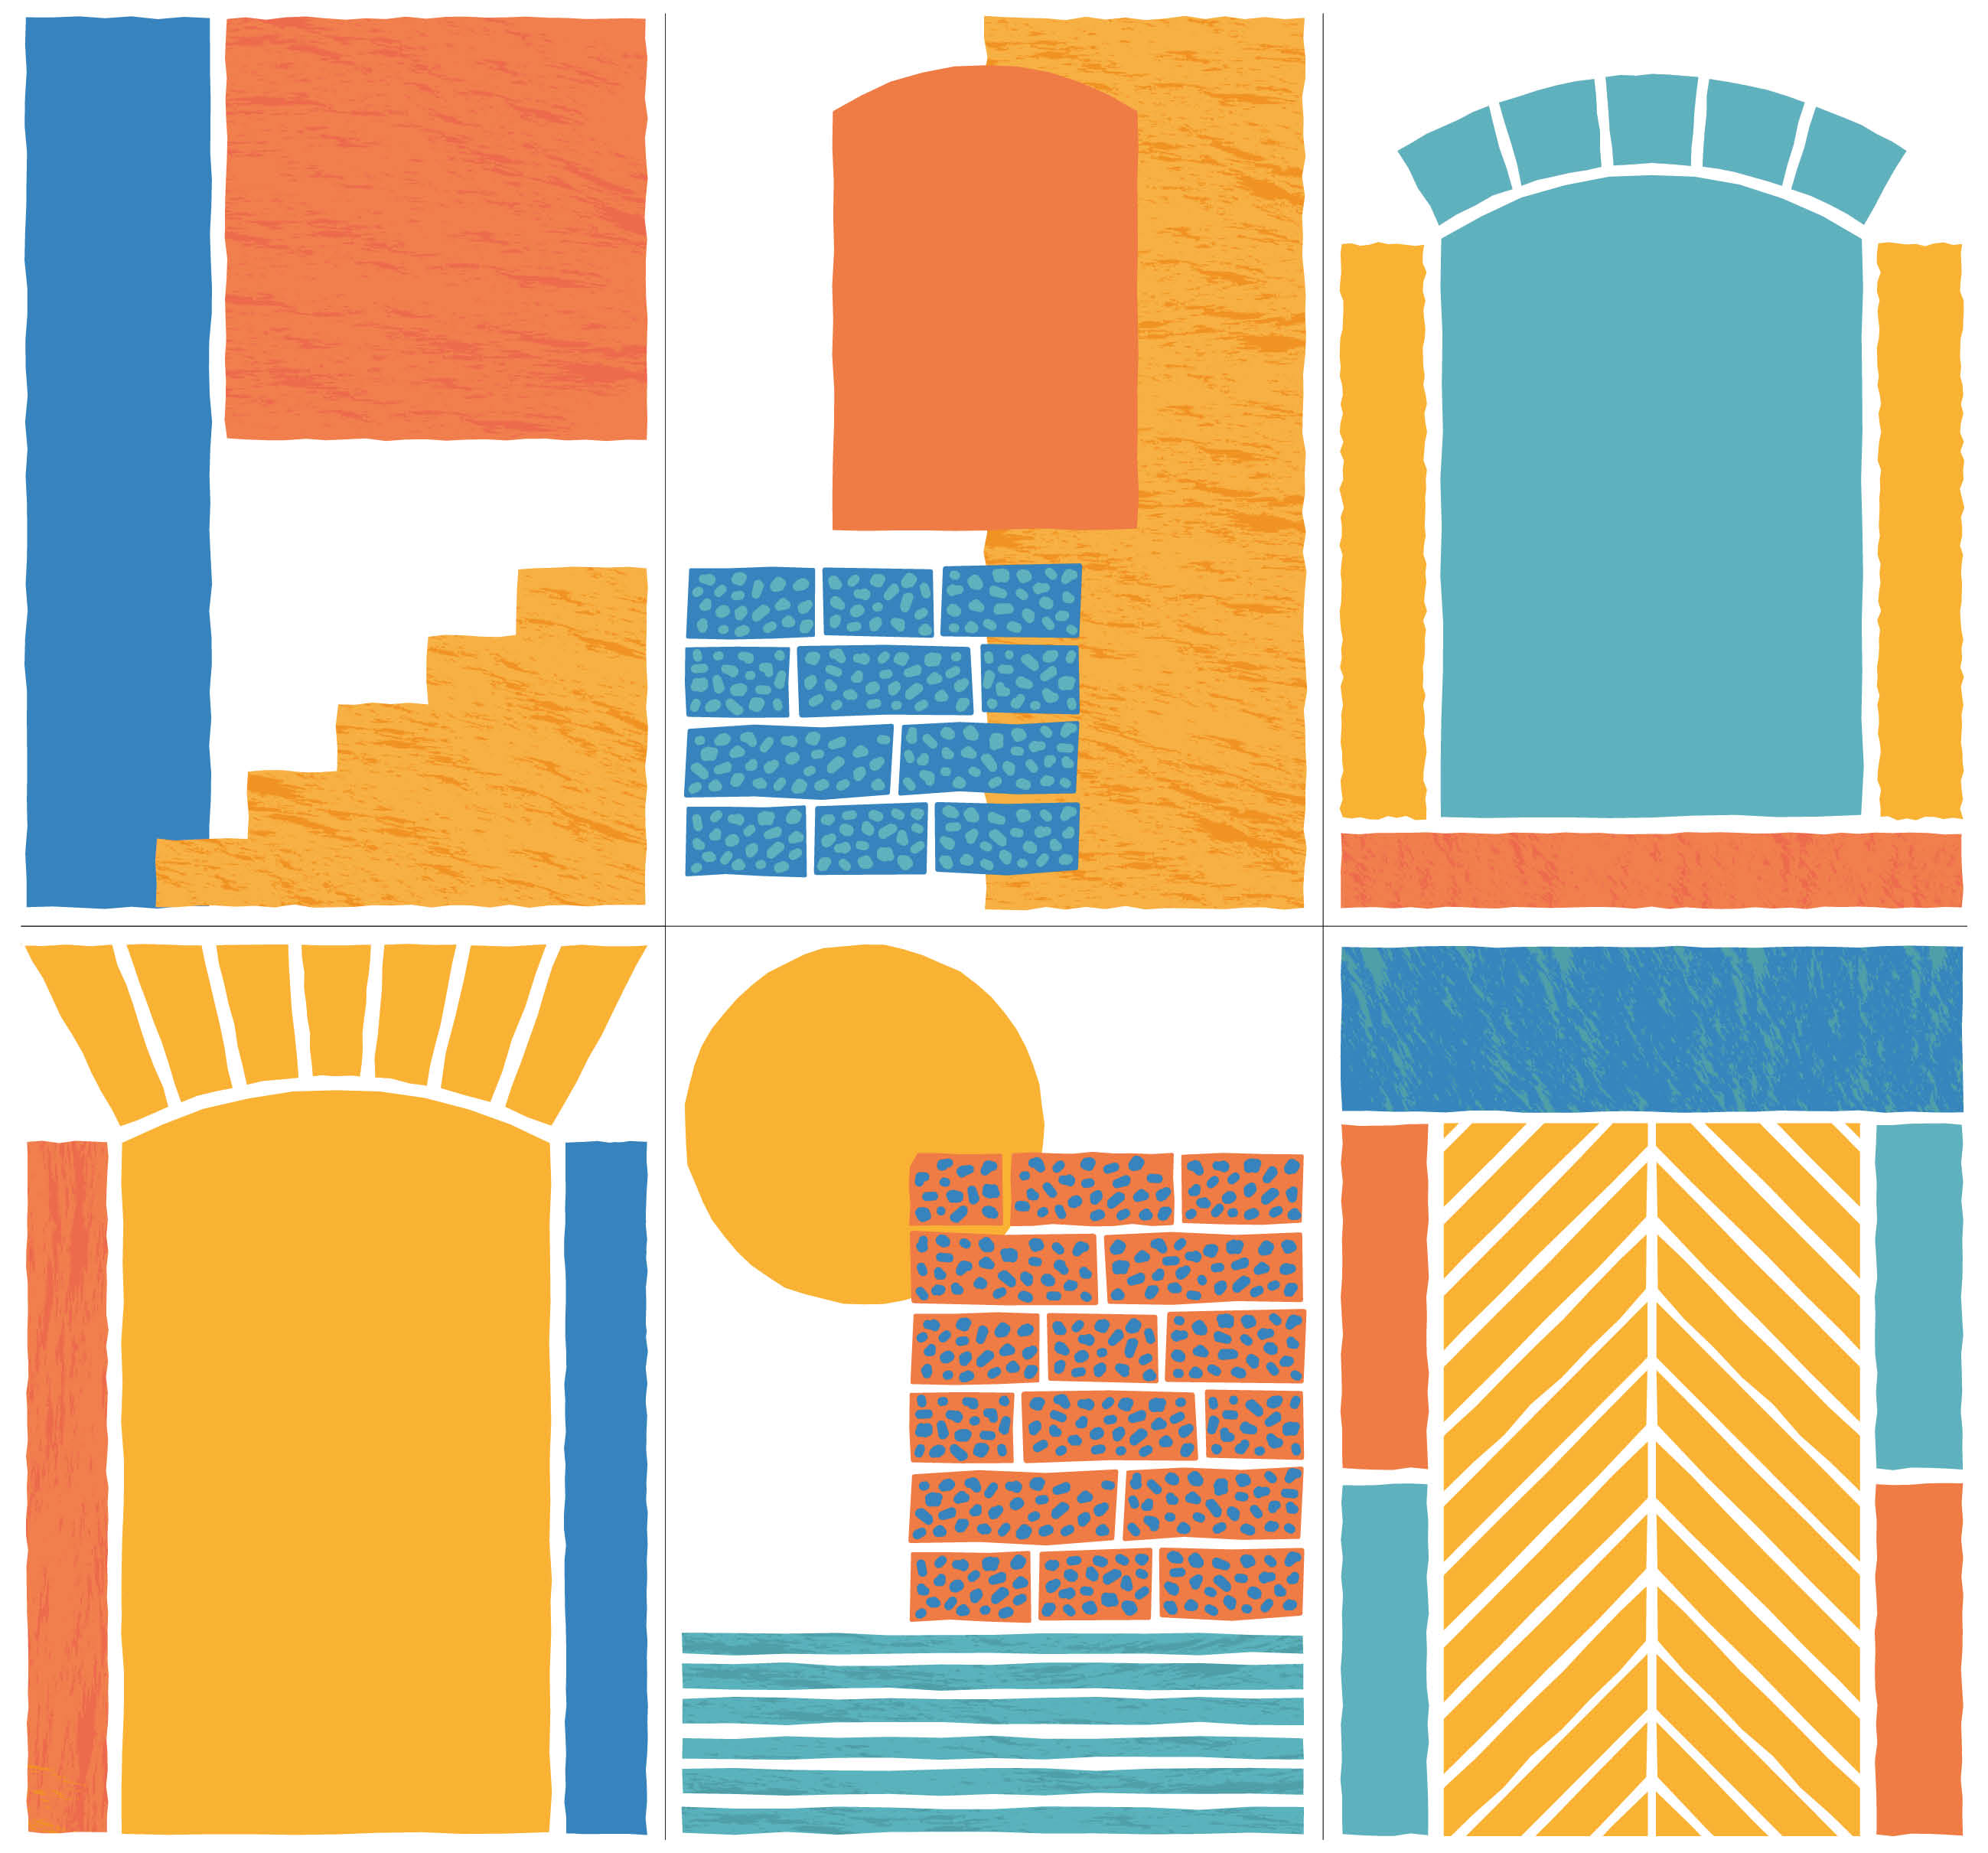 A grid of 6 illustrations that look like shapes taken from Arnolfini's building in orange, yellow, and teal.